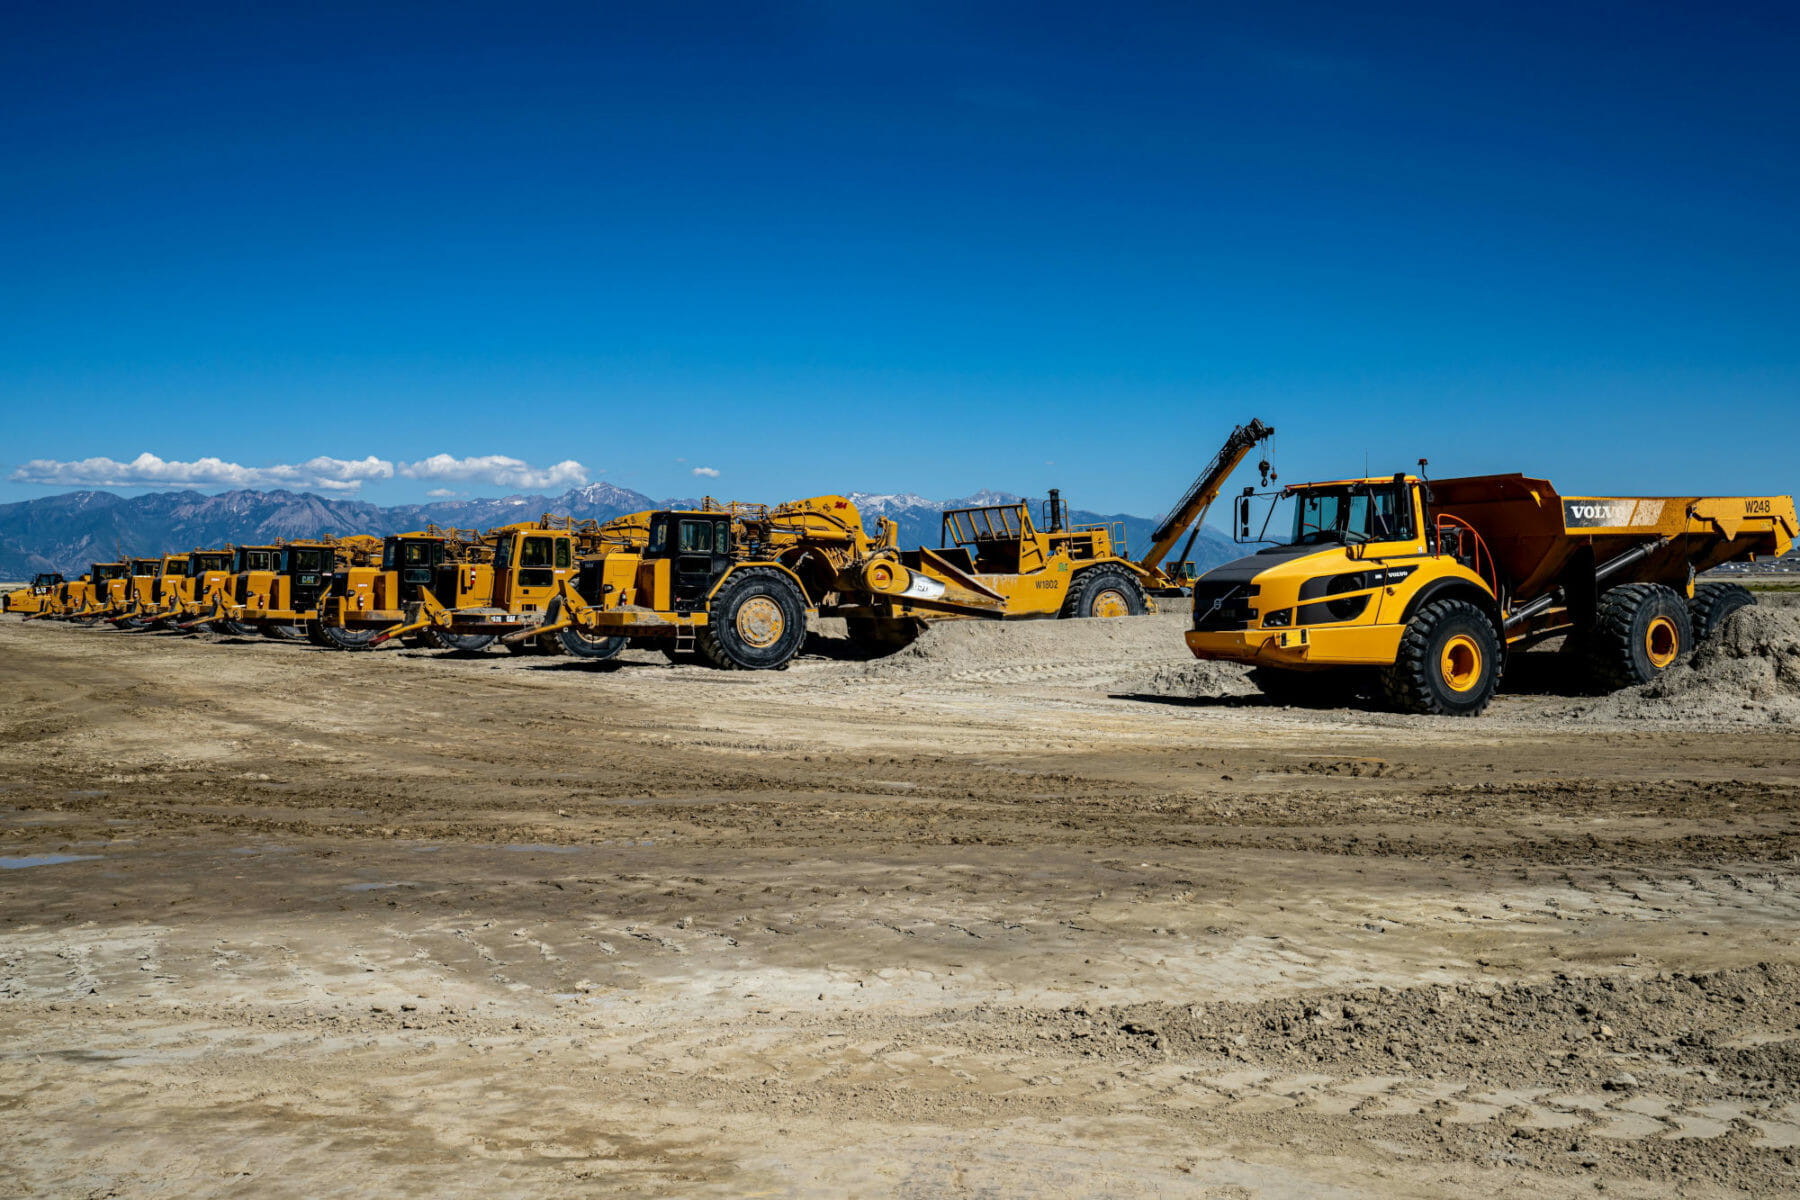 Wollam Construction | building demolition and reclamation in Utah